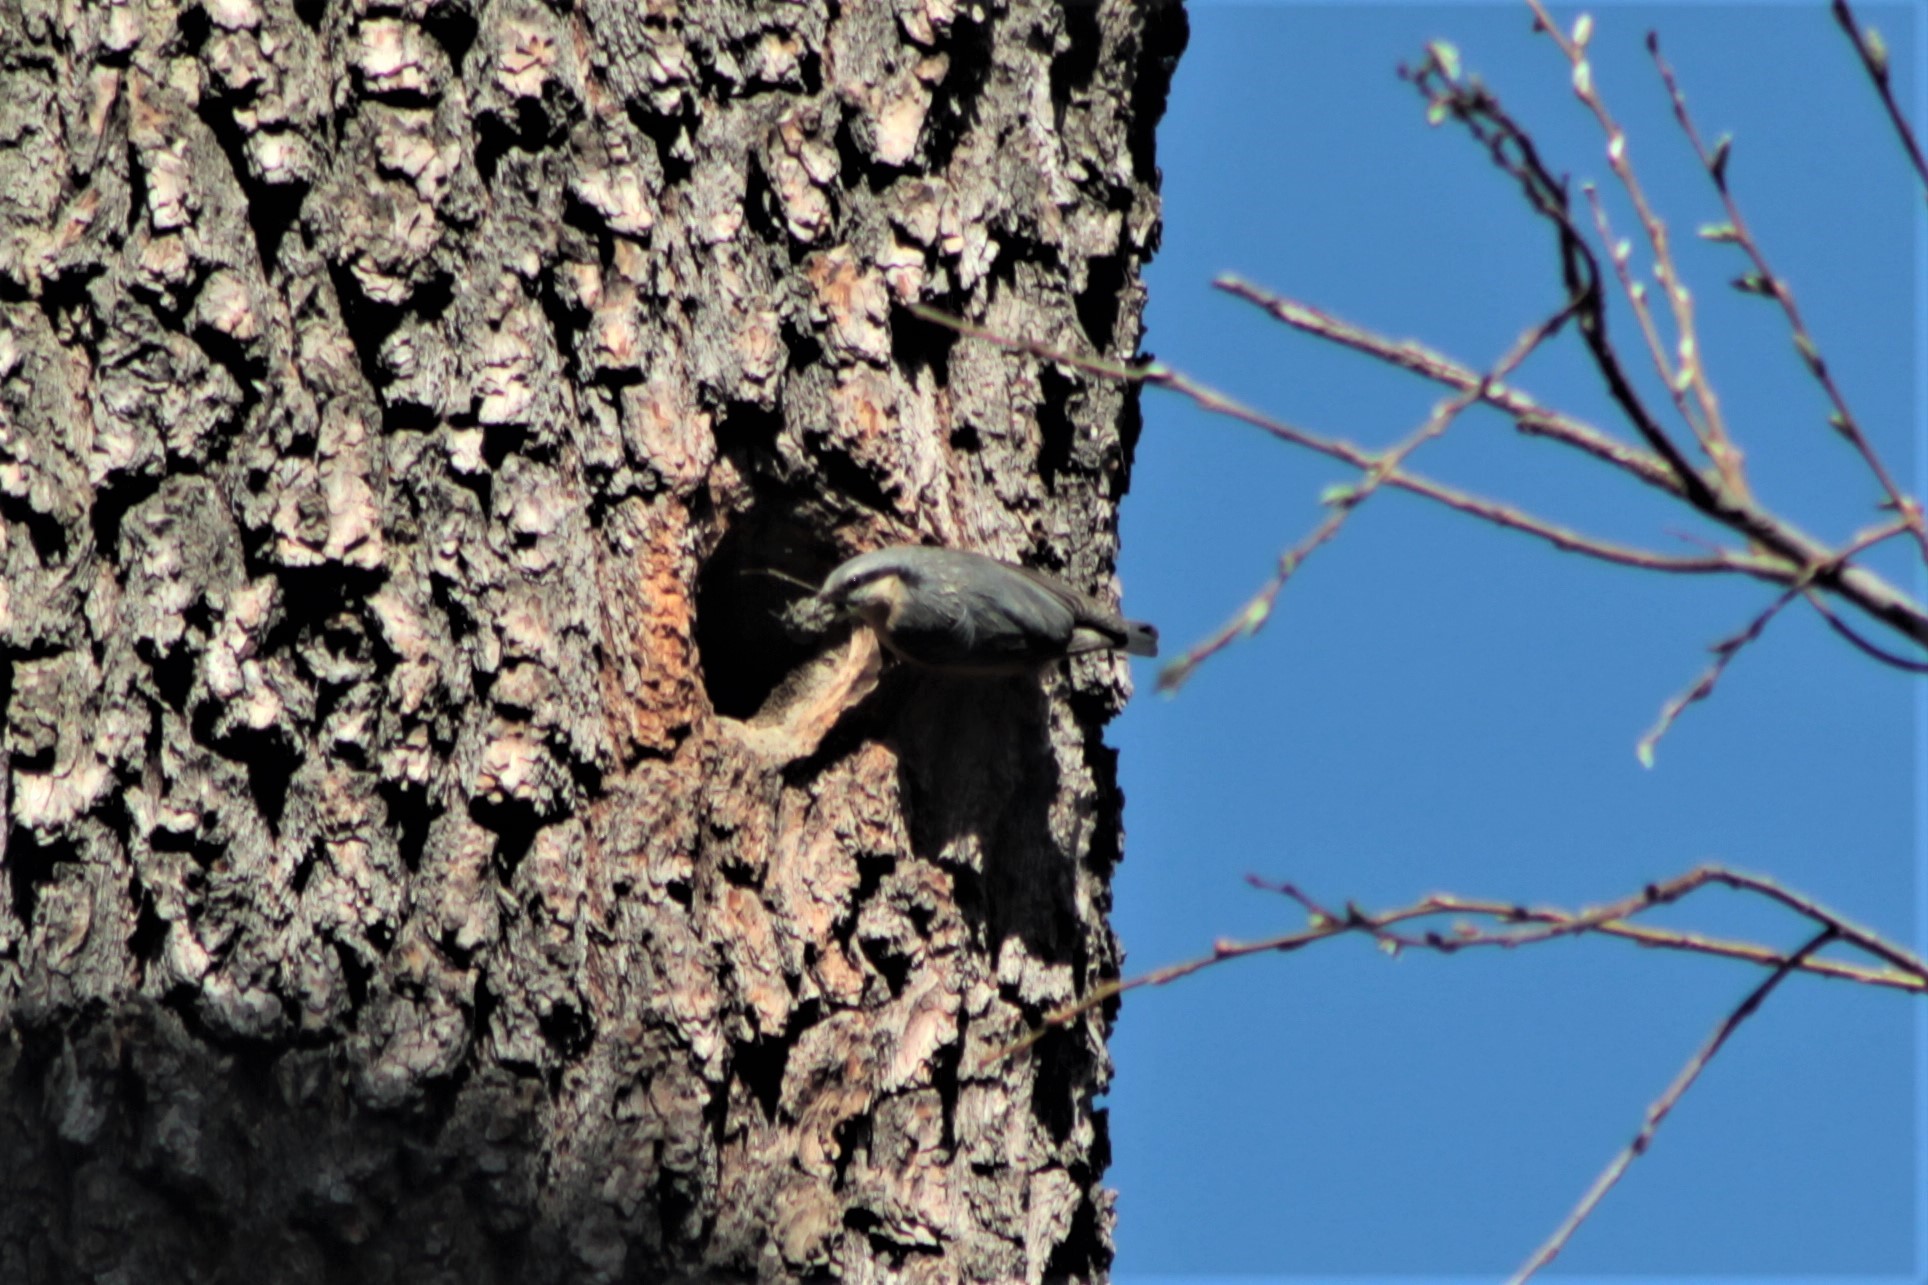 Nuthatch at work...